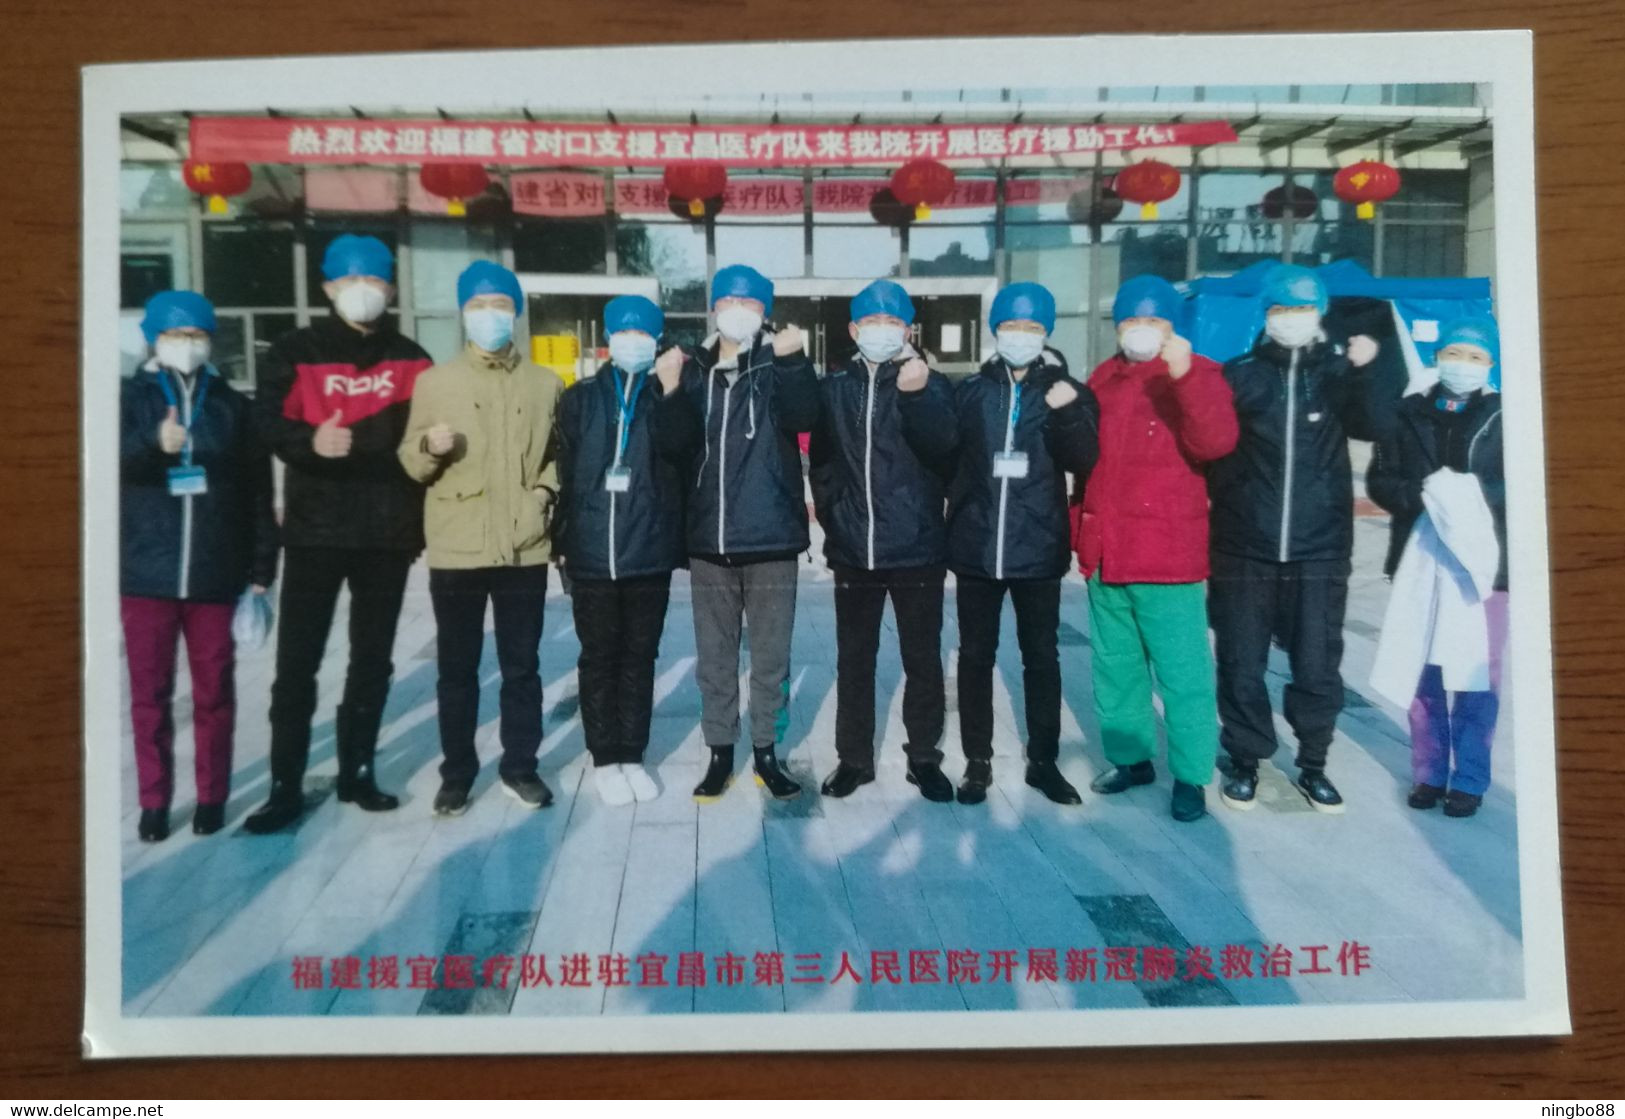 Treating Curing Patients Of NCP,CN 20 Fujian Medical Team Aid Yichang Fight COVID-19 Photo-printed-in Personalized PSC - Malattie